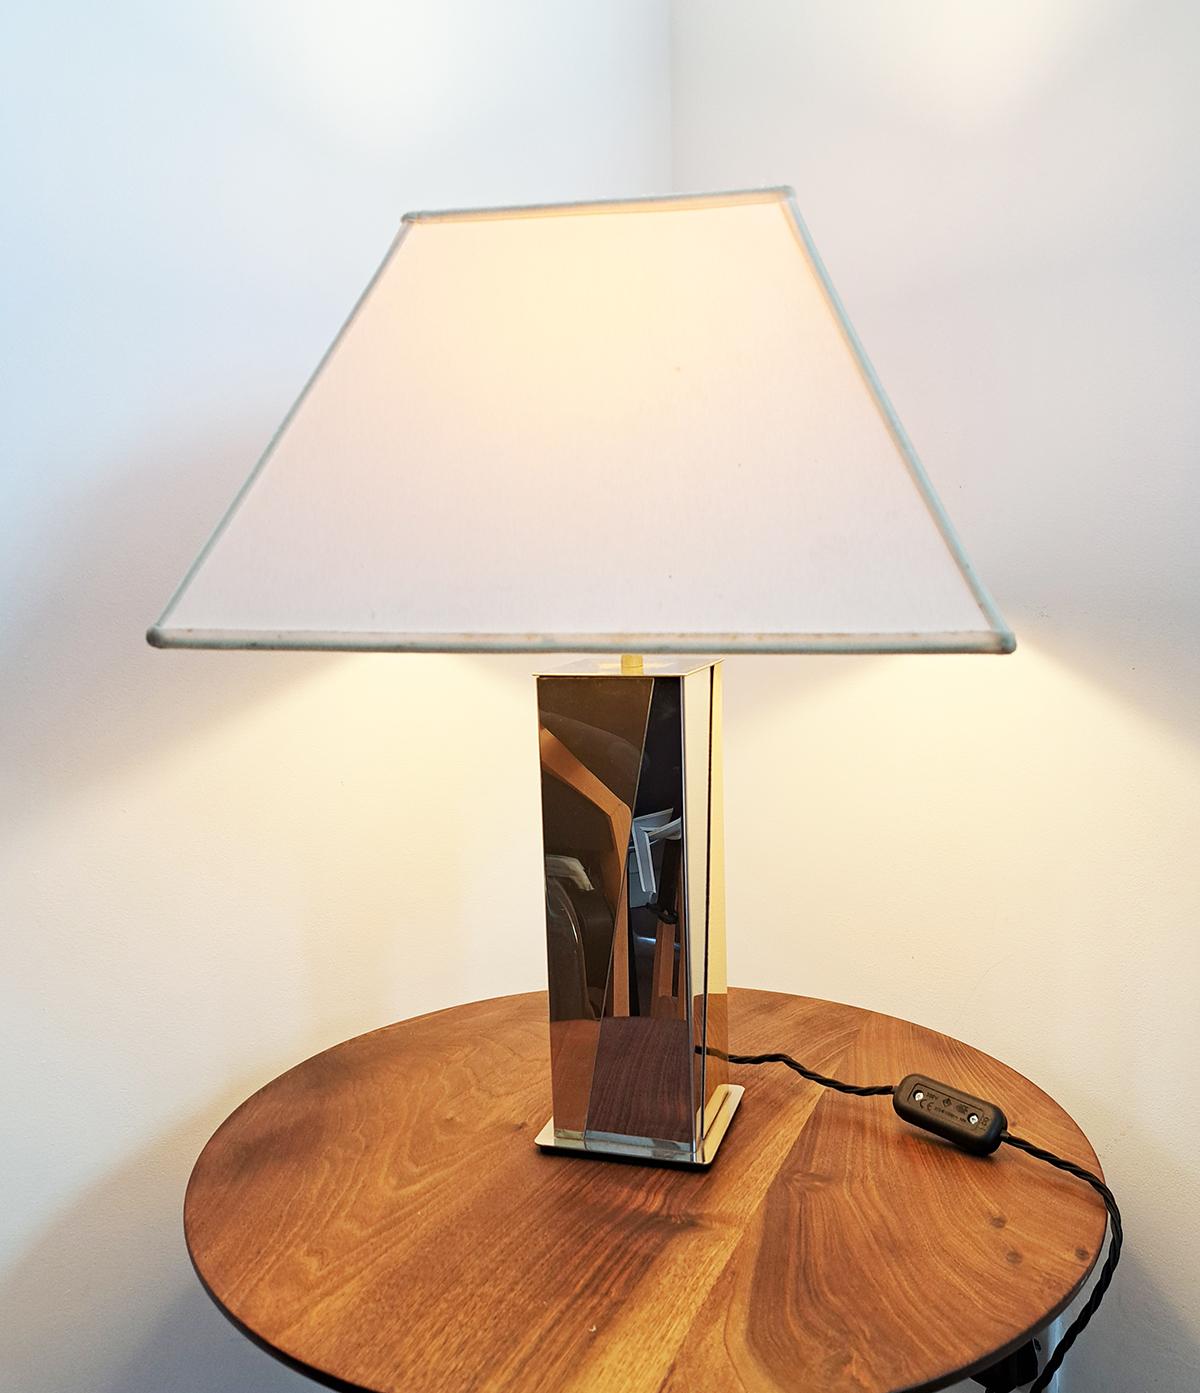 Regency Design Table Lamp By Willy Rizzo For Lumica, a lovely piece with gold and chrome plated finish. in good overall condition. Newly rewired with a switch on a black cable. 